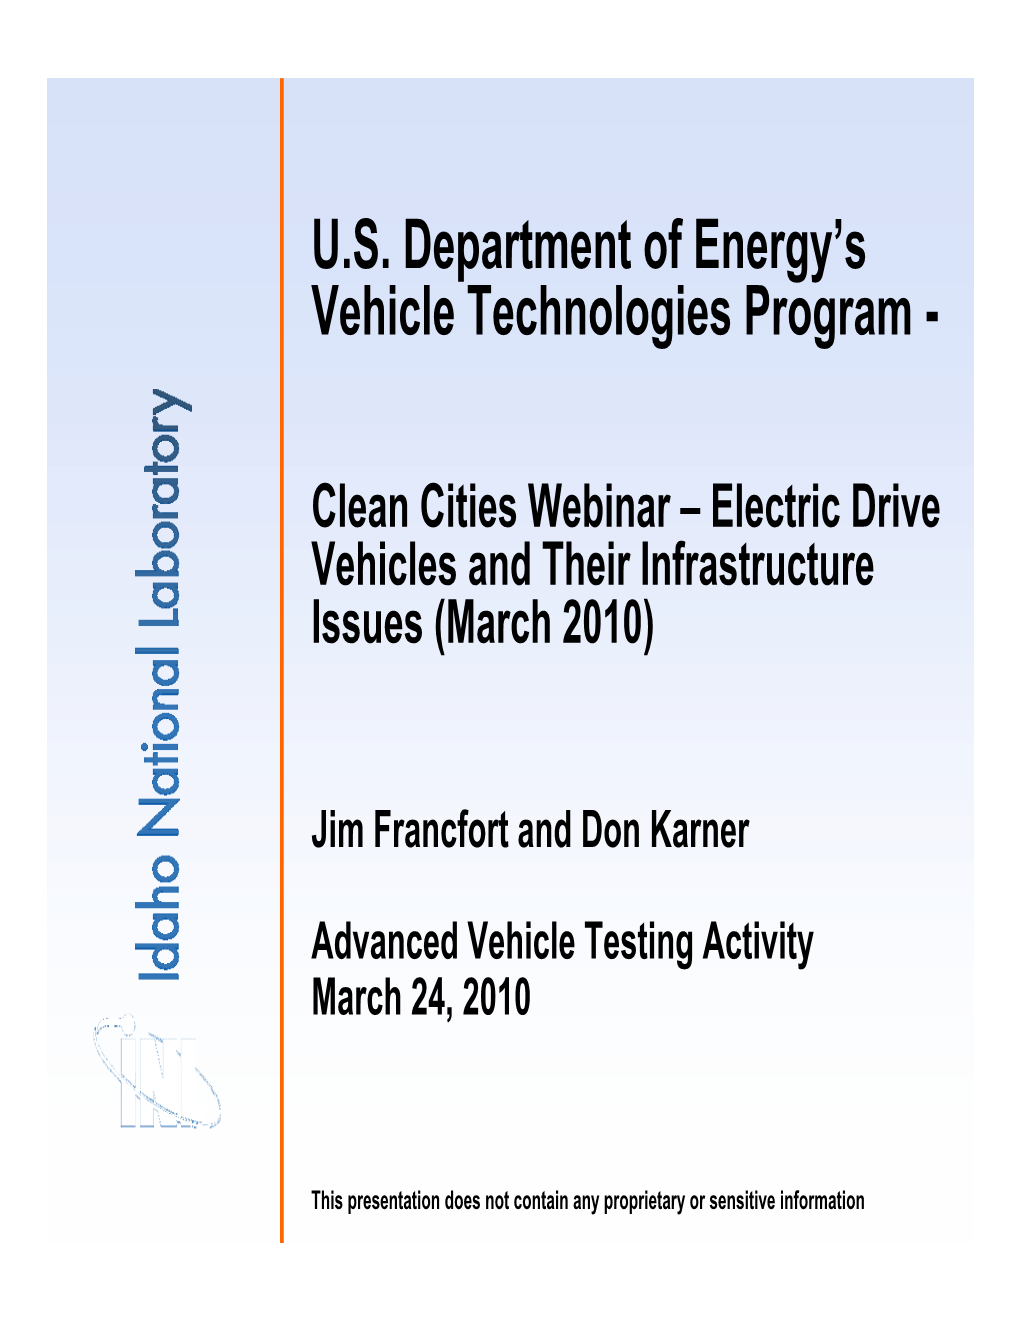 Electric Drive Vehicles and Their Infrastructure Issues (March 2010)